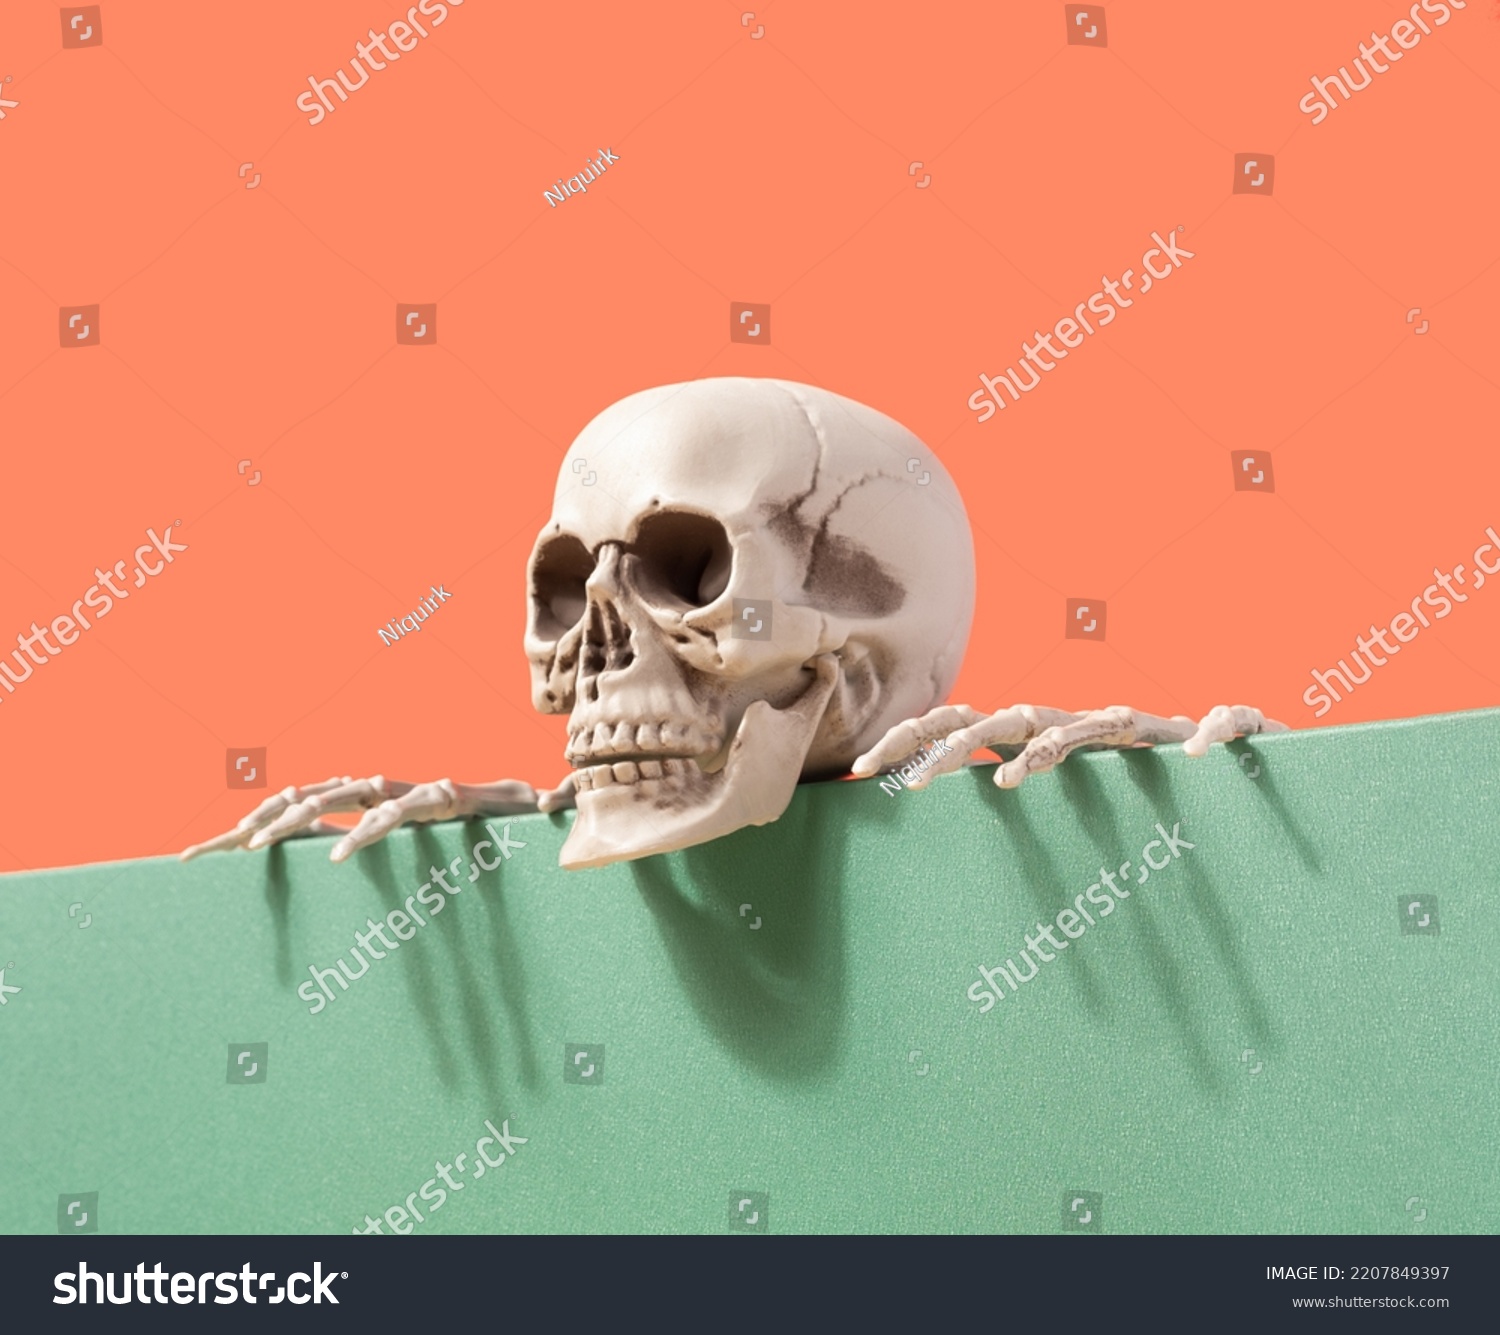 Skeleton on the edge of the table against the two-tone background. Spooky Halloween futuristic concept. Santa Muerte #2207849397